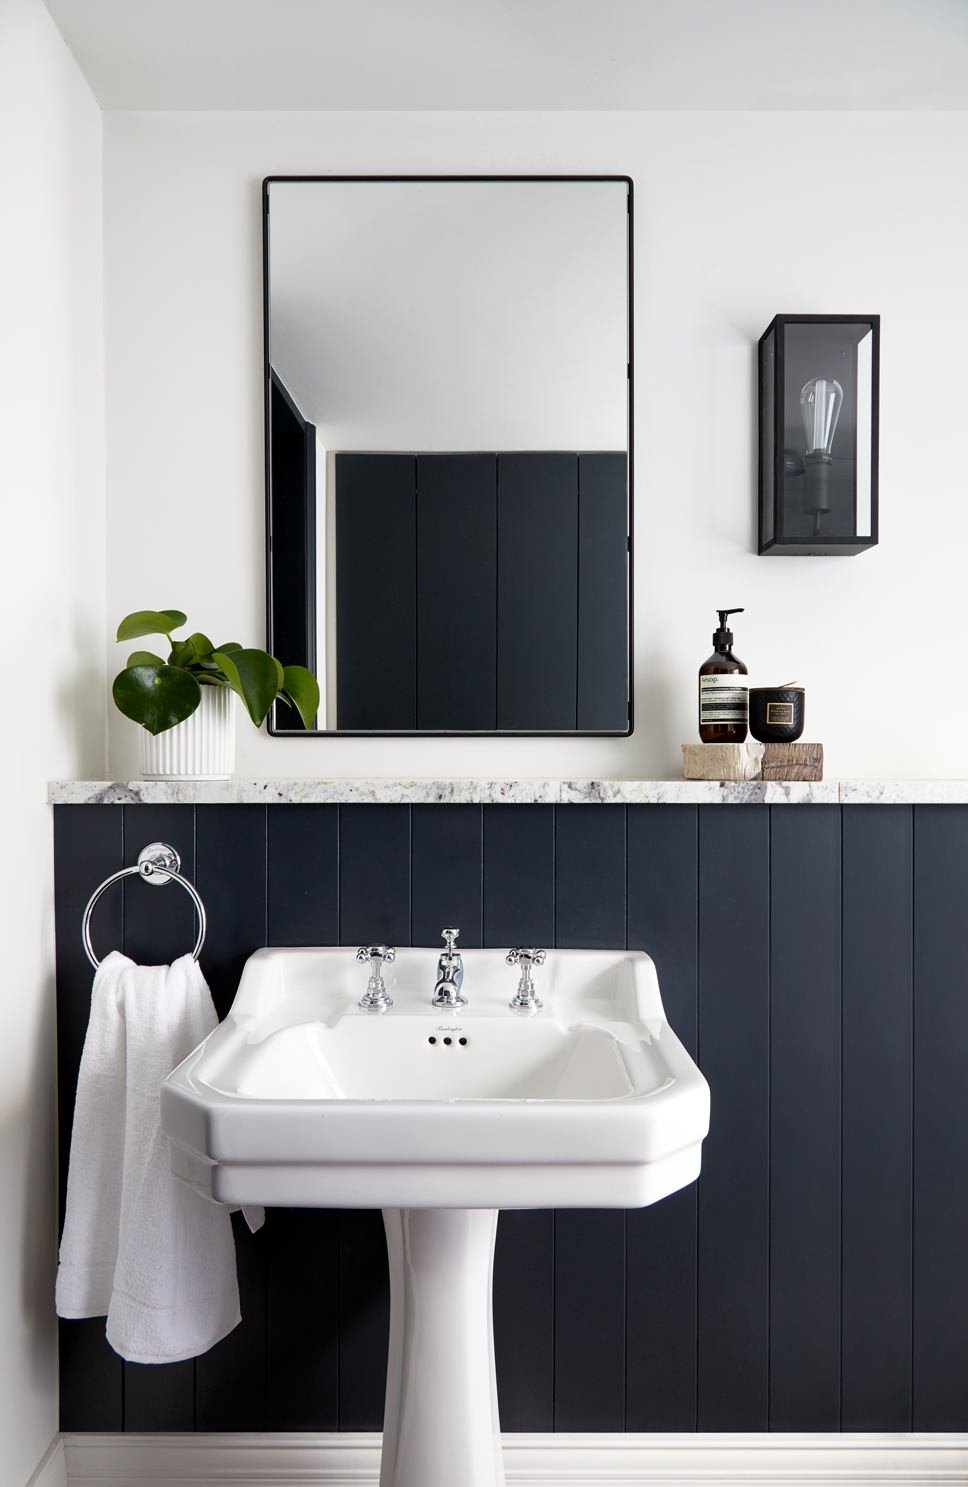 A Bathroom Renovation Cost, How Much Does It Cost To Renovate A Bathroom In London